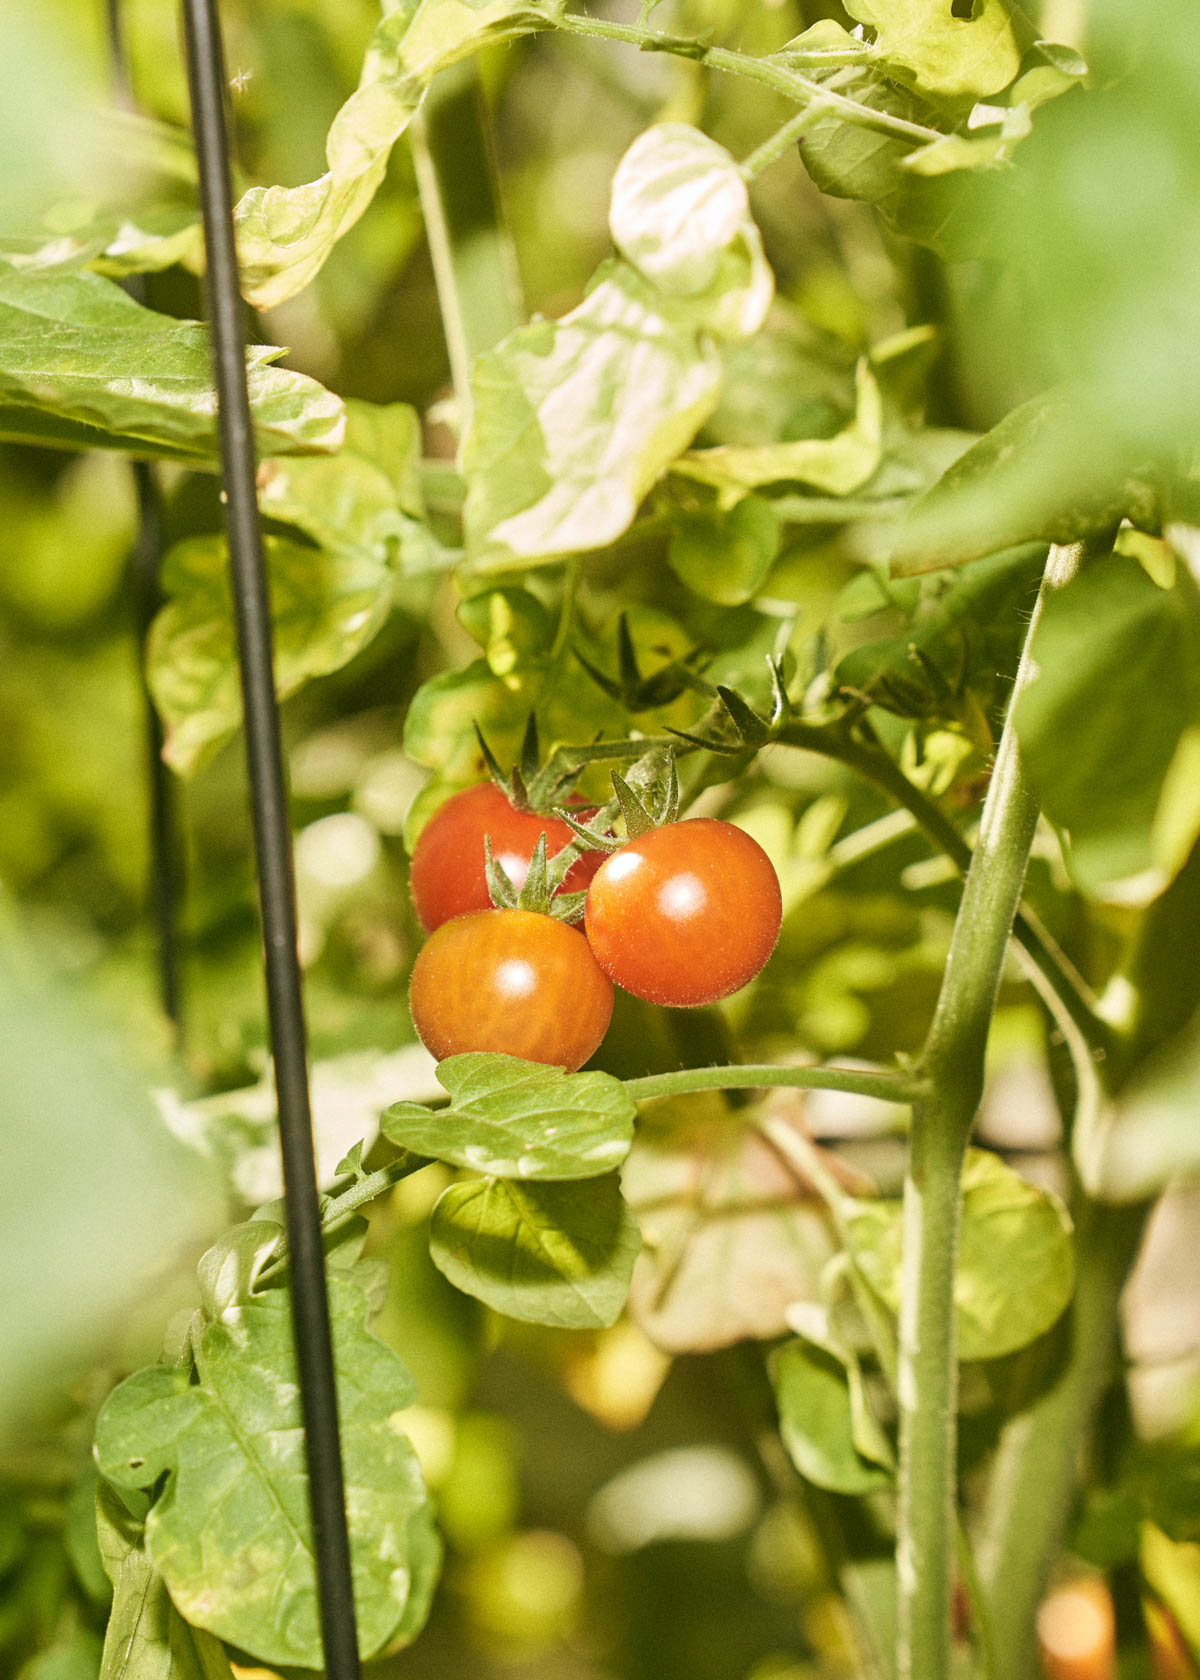 Cherry tomatoes on the vine in a garden.